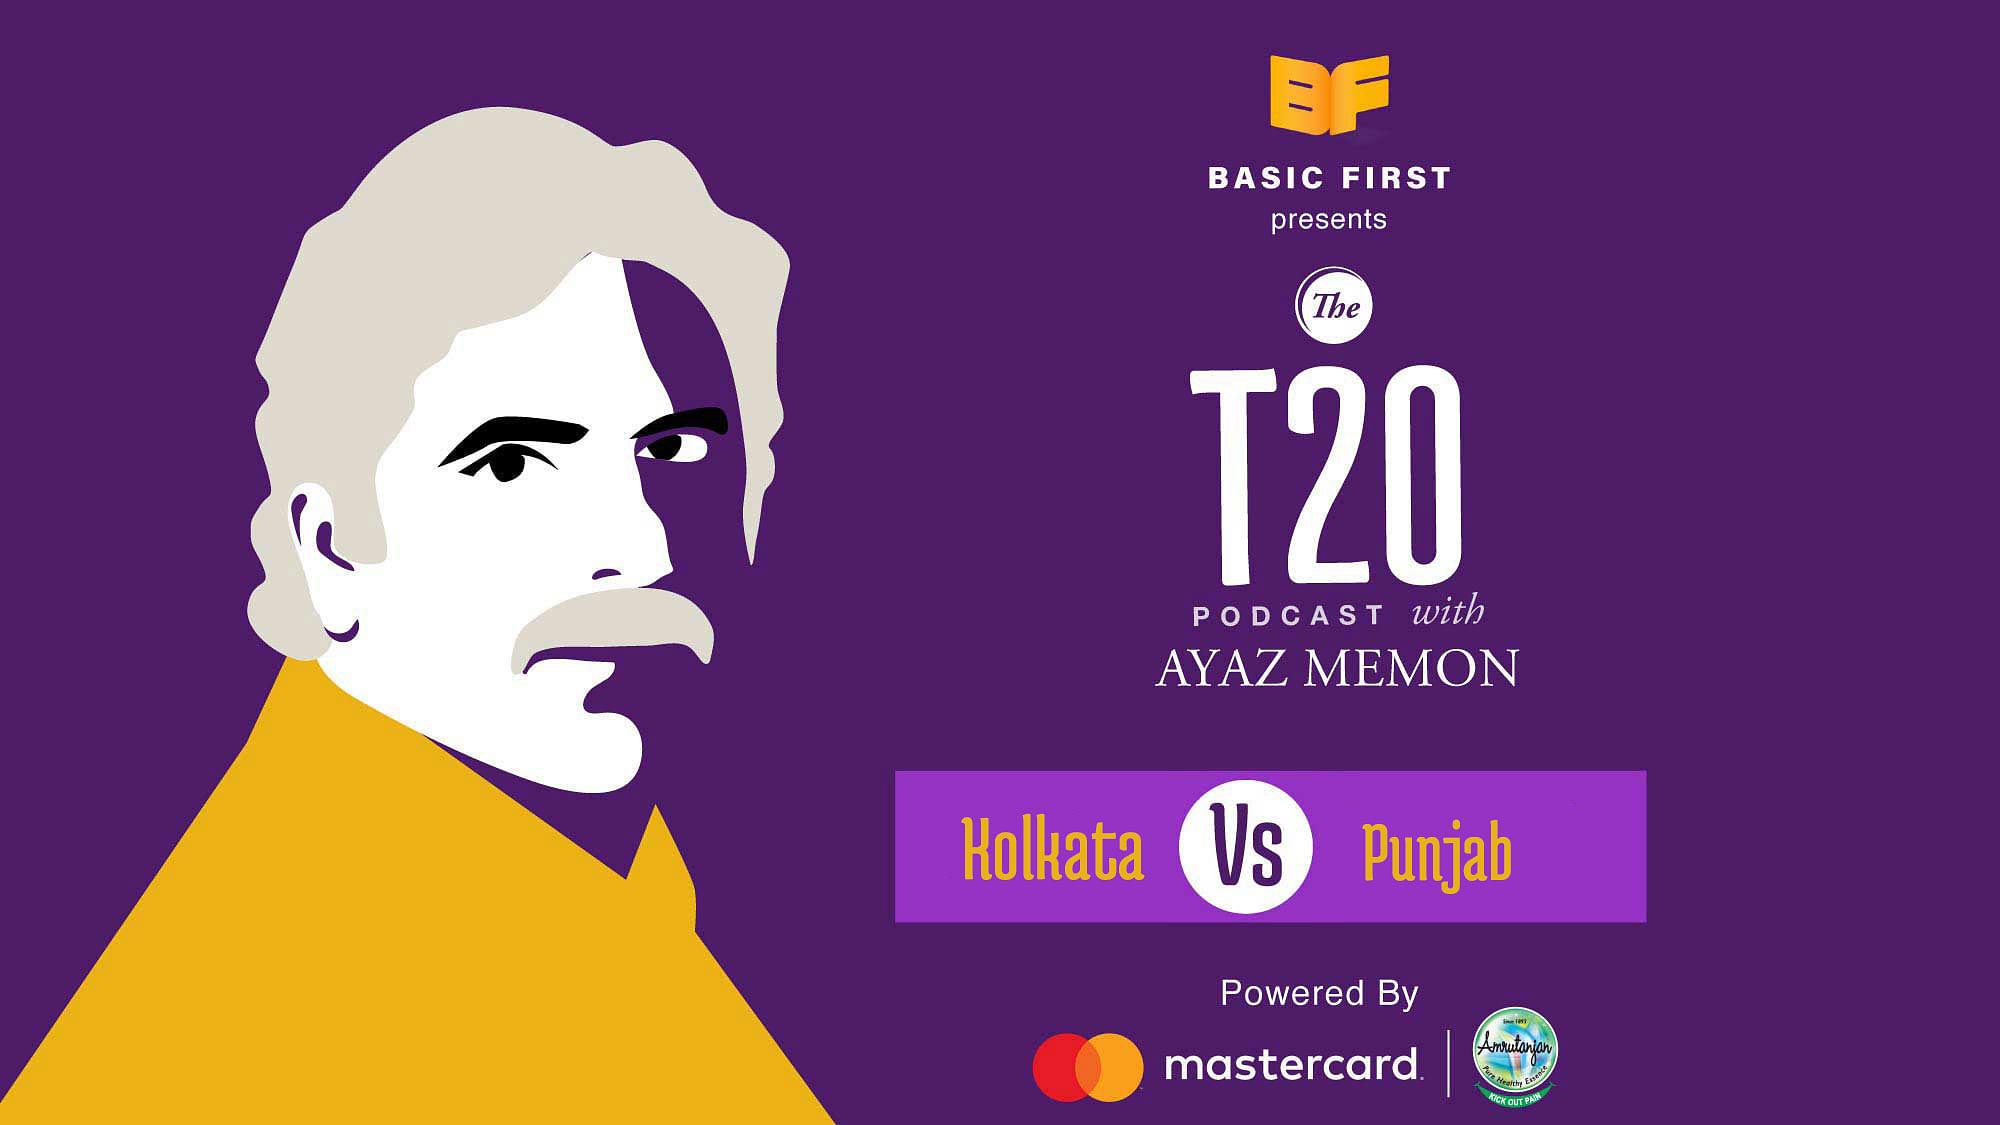 On Episode 46 of The T20 Podcast, Ayaz Memon and Mendra Dorjey discuss Punjab’s major turnaround that has seen them win five matches on the trot, including the win over Kolkata on Monday night.